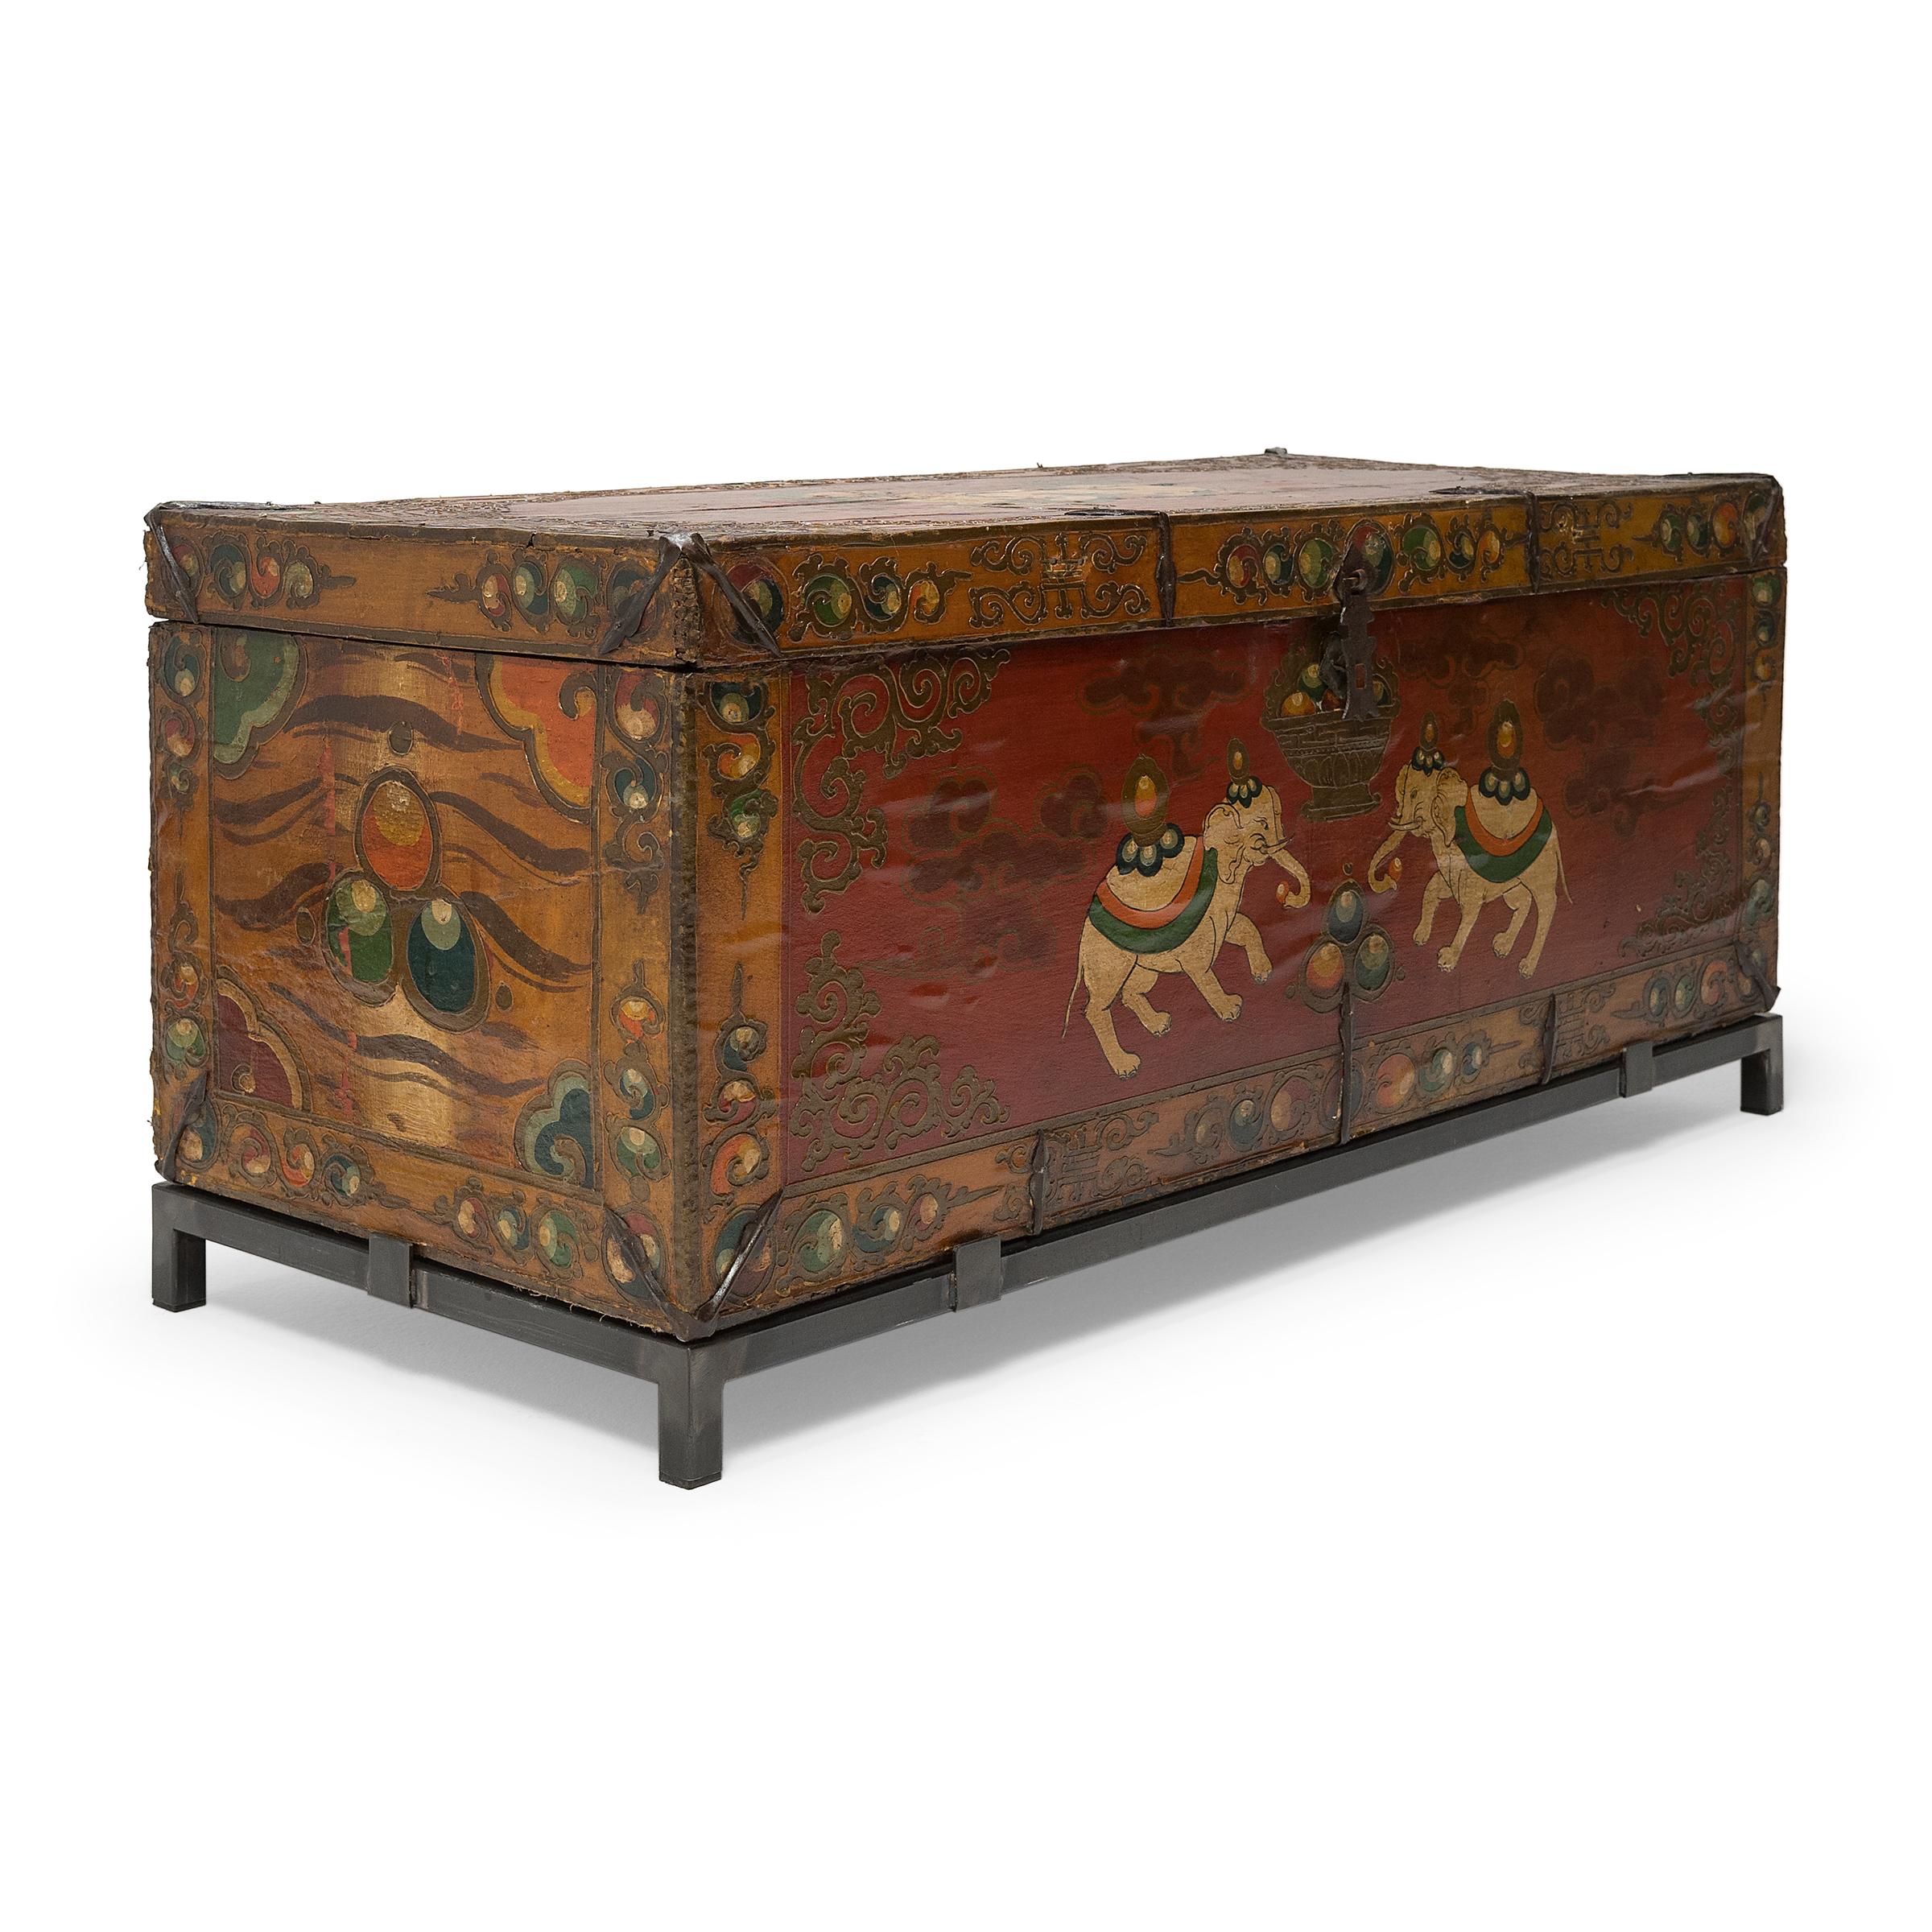 This fantastic painted trunk from northern China is lavishly decorated from end to end in the Tibetan style with a rich palette of red, orange, and green. Raised outlines and layers of glossy lacquer lend the chest rich texture and catch the light